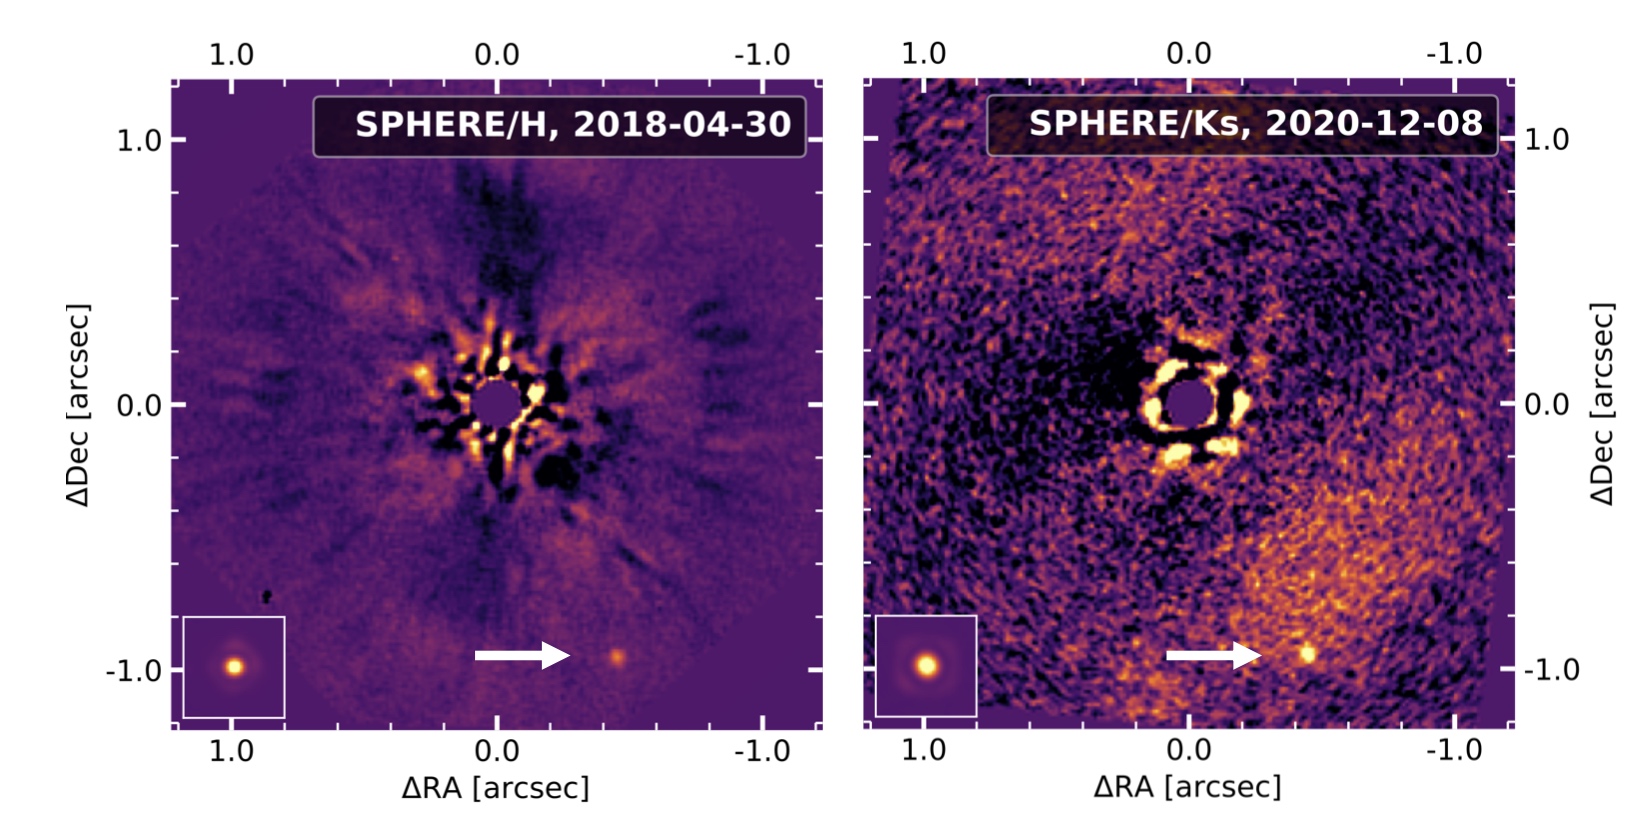 The exoplanet YSES 2b as imaged by SPHERE